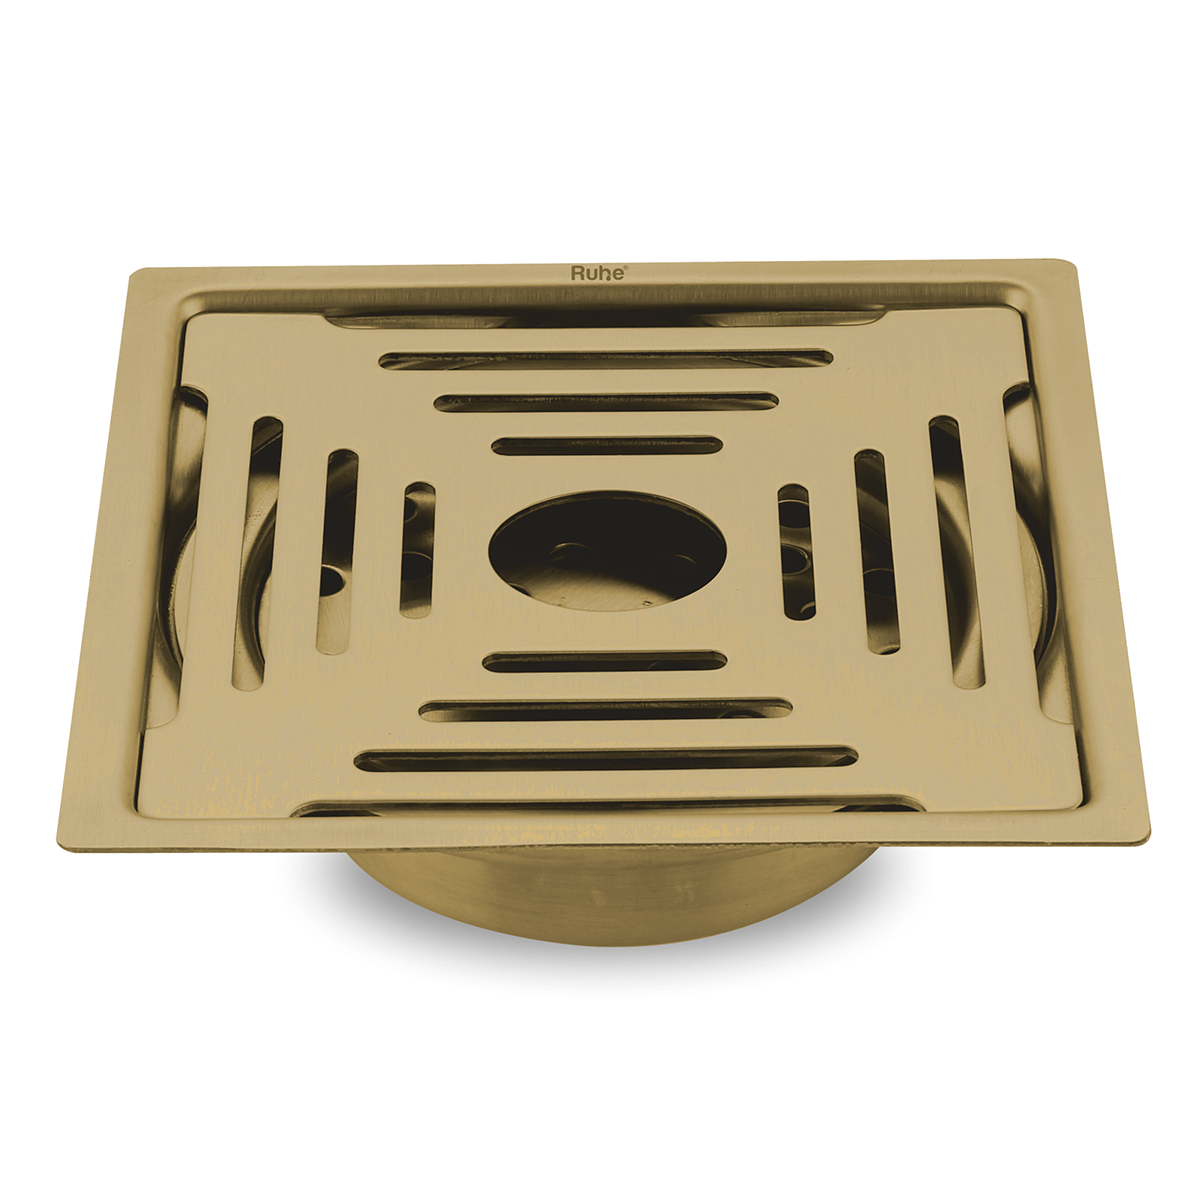 Opal Square Flat Cut Floor Drain in Yellow Gold PVD Coating (5 x 5 Inches) with Hole